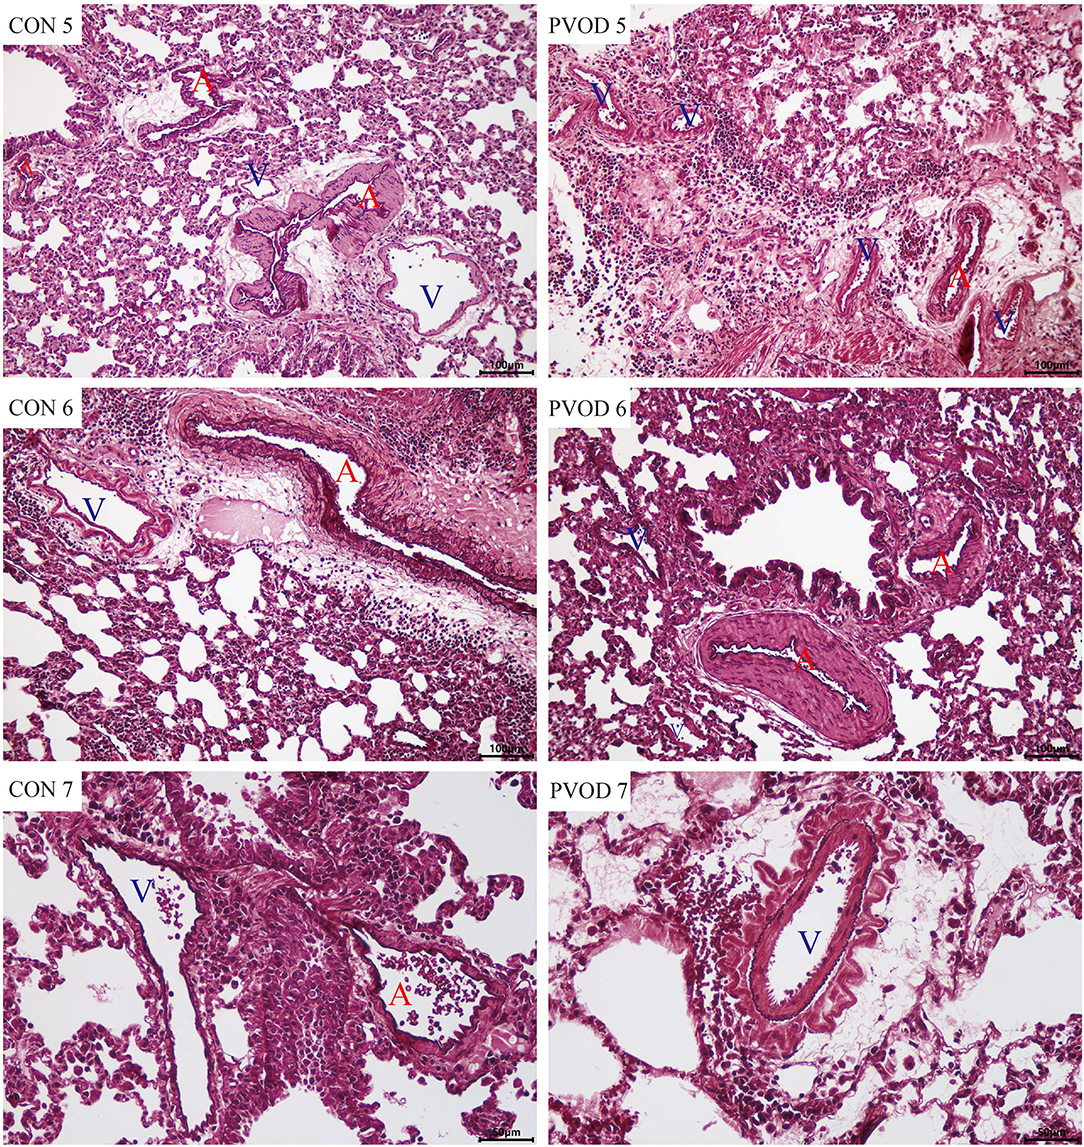 Frontiers Differential Expression Profile of microRNAs and Tight Junction in the Lung Tissues of Rat With Mitomycin-C-Induced Pulmonary Veno-Occlusive Disease